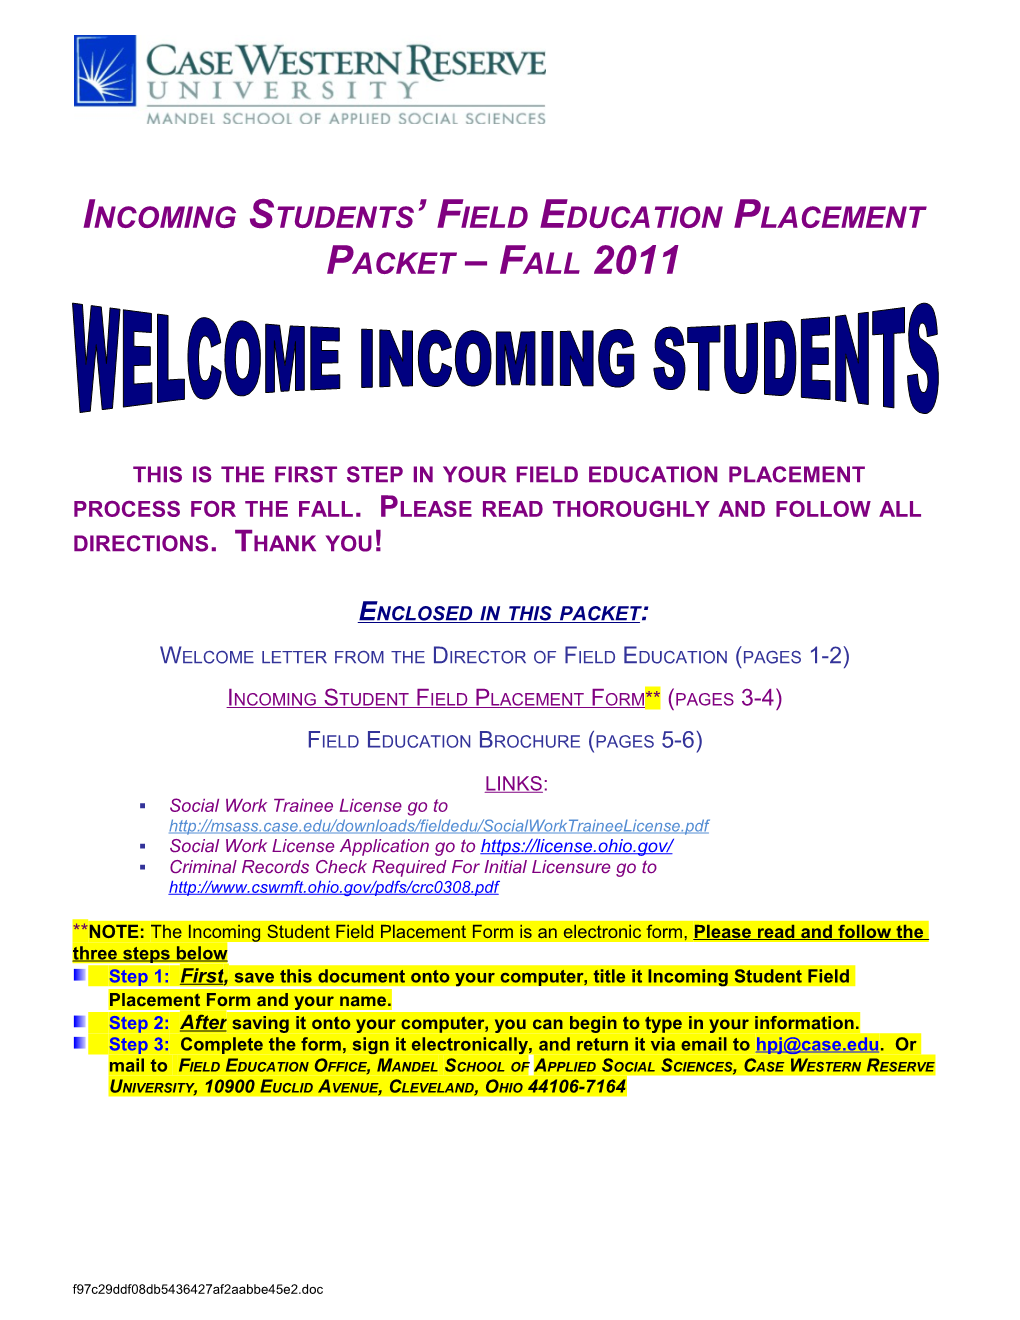 Incoming Students Field Education Placement Packet Fall 2011